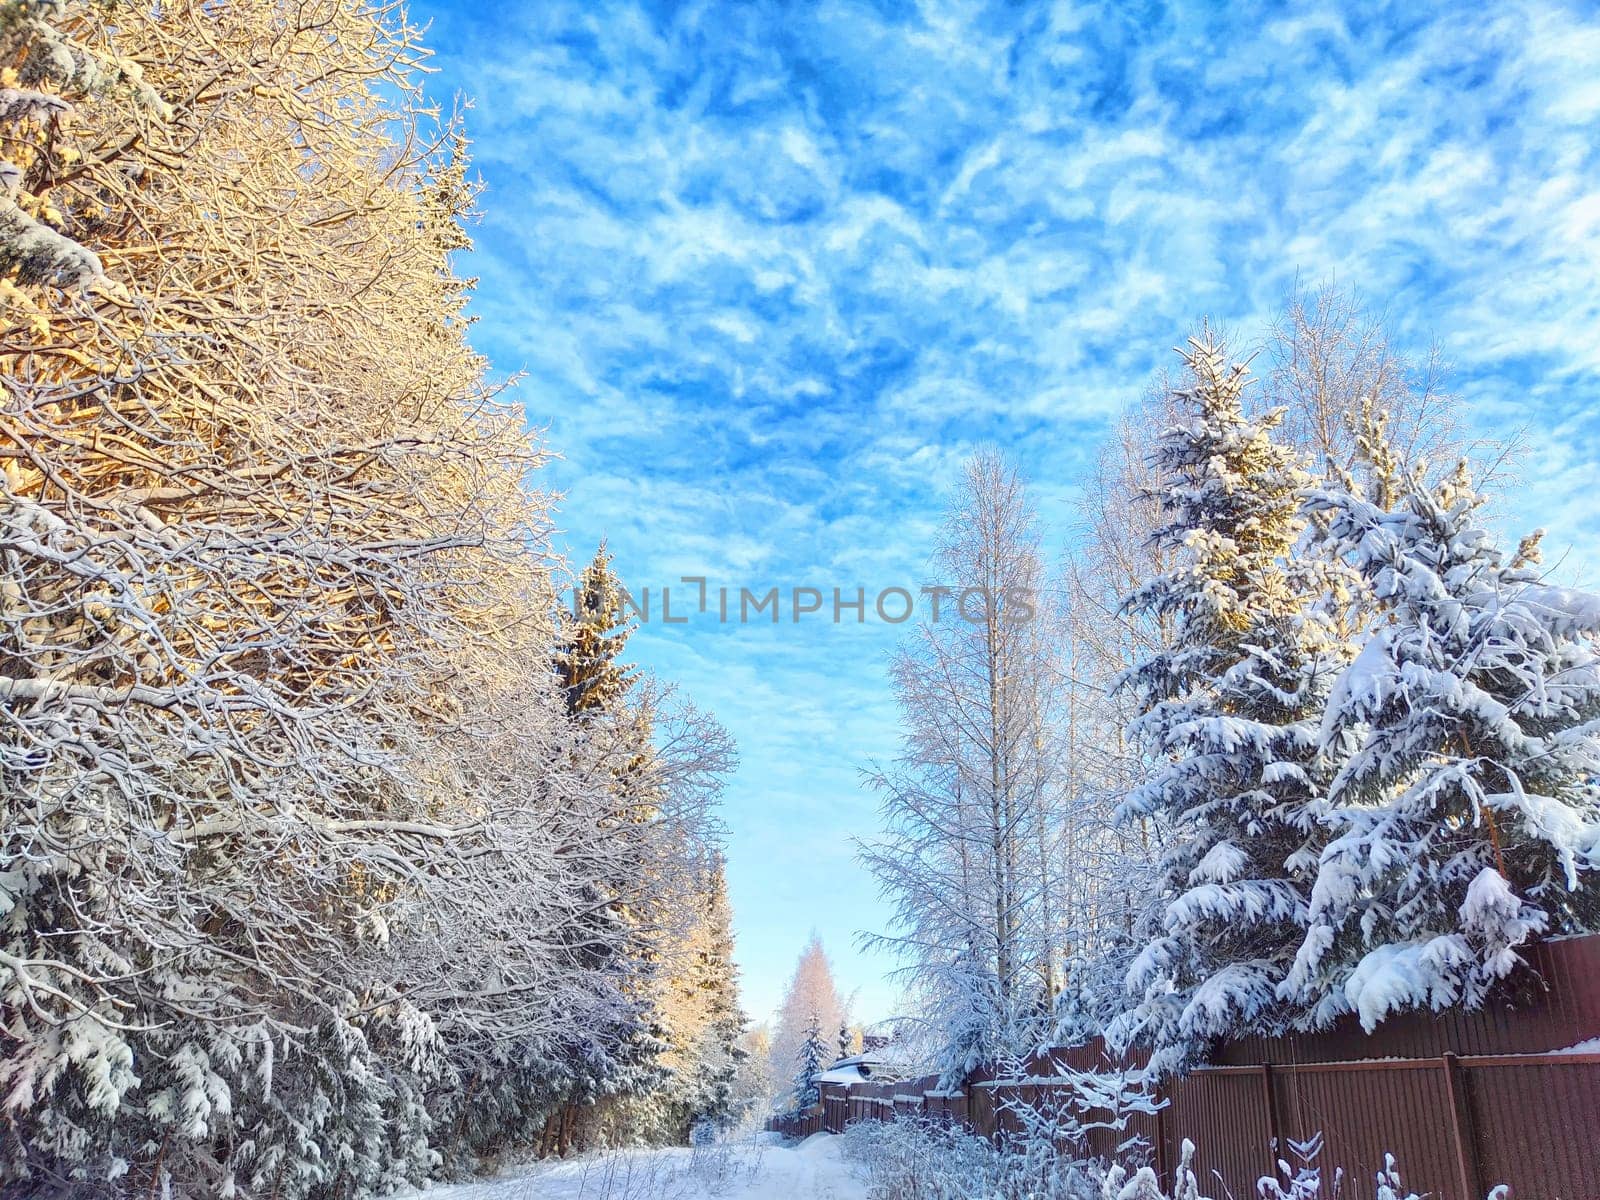 Winter Wonderland at Dusk With Snow-Covered Trees forest and blue sky with white clouds. Cold winter forest